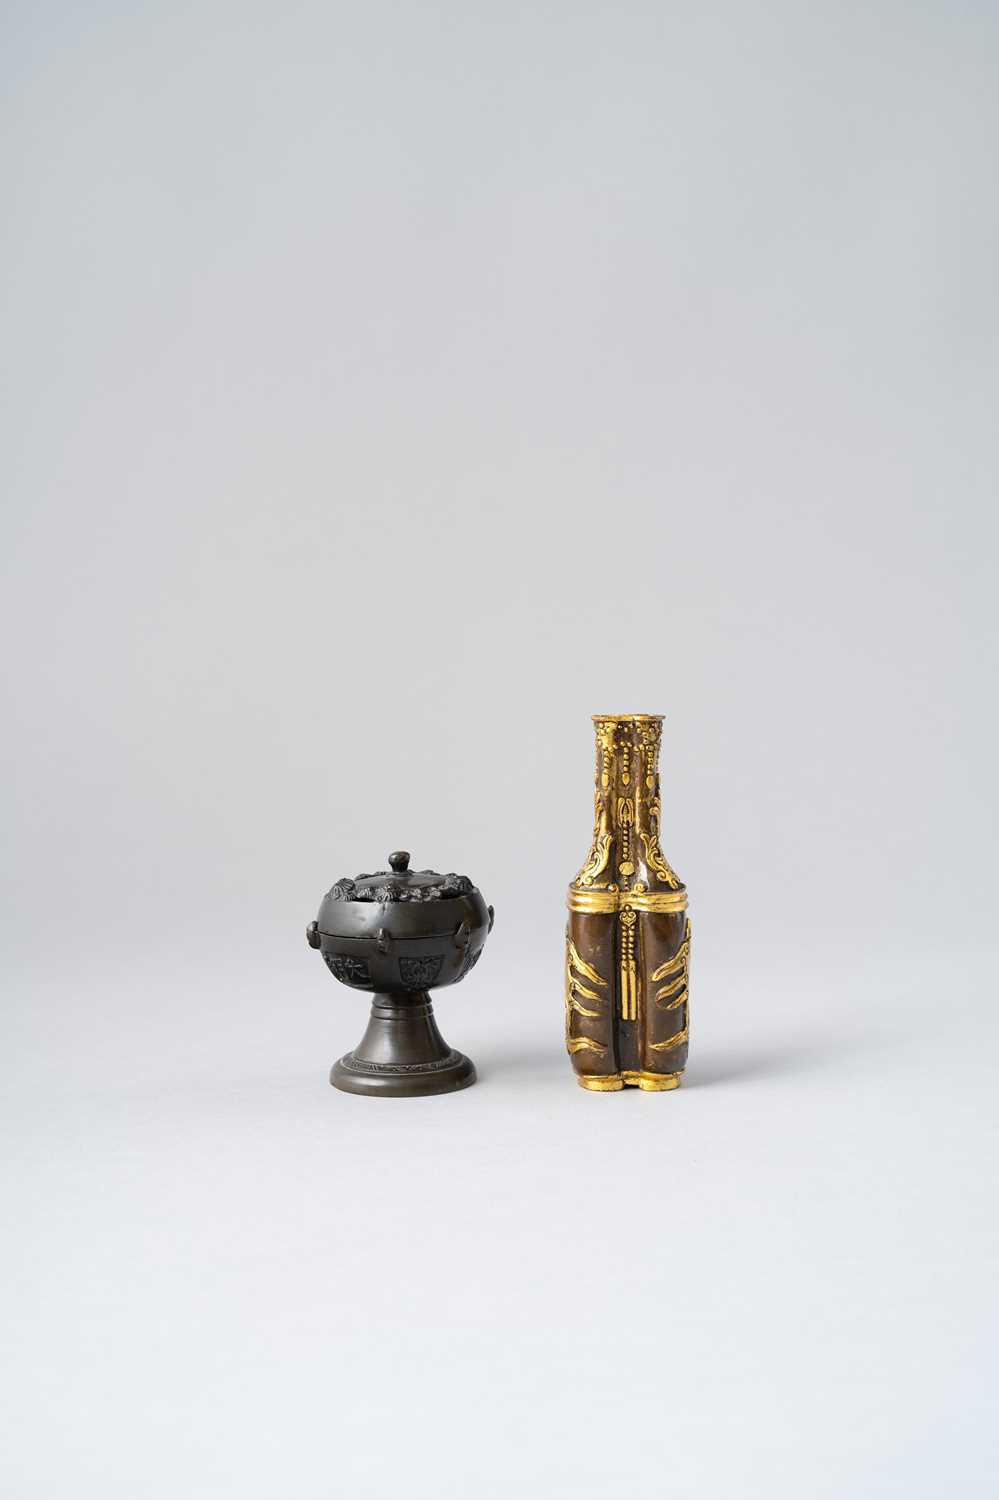 TWO CHINESE ARCHAISTIC BRONZE VESSELS 17TH CENTURY AND LATER One parcel-gilt, formed as two